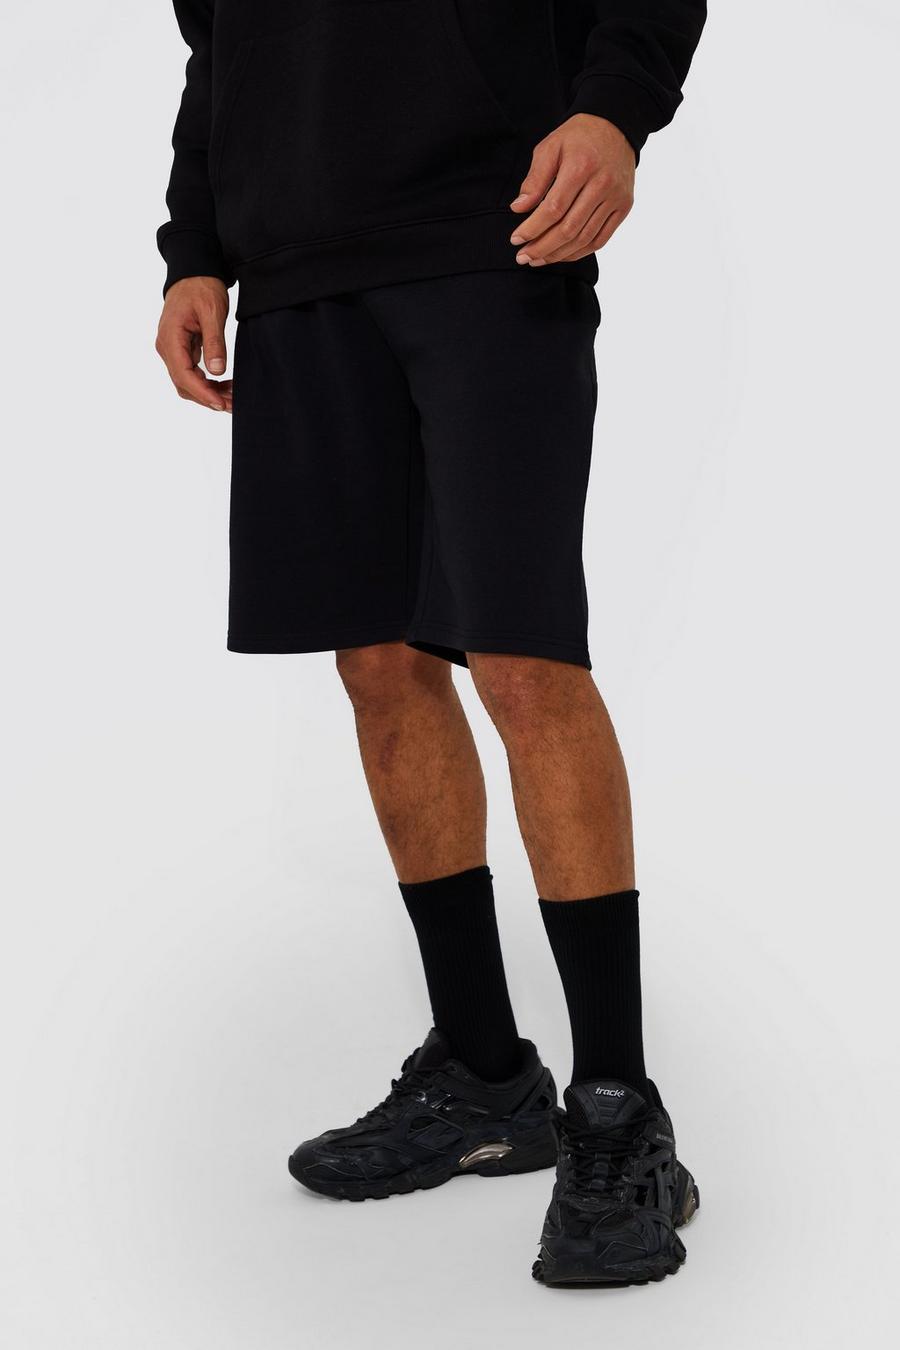 Black Tall Mid Length Jersey Short with REEL Cotton